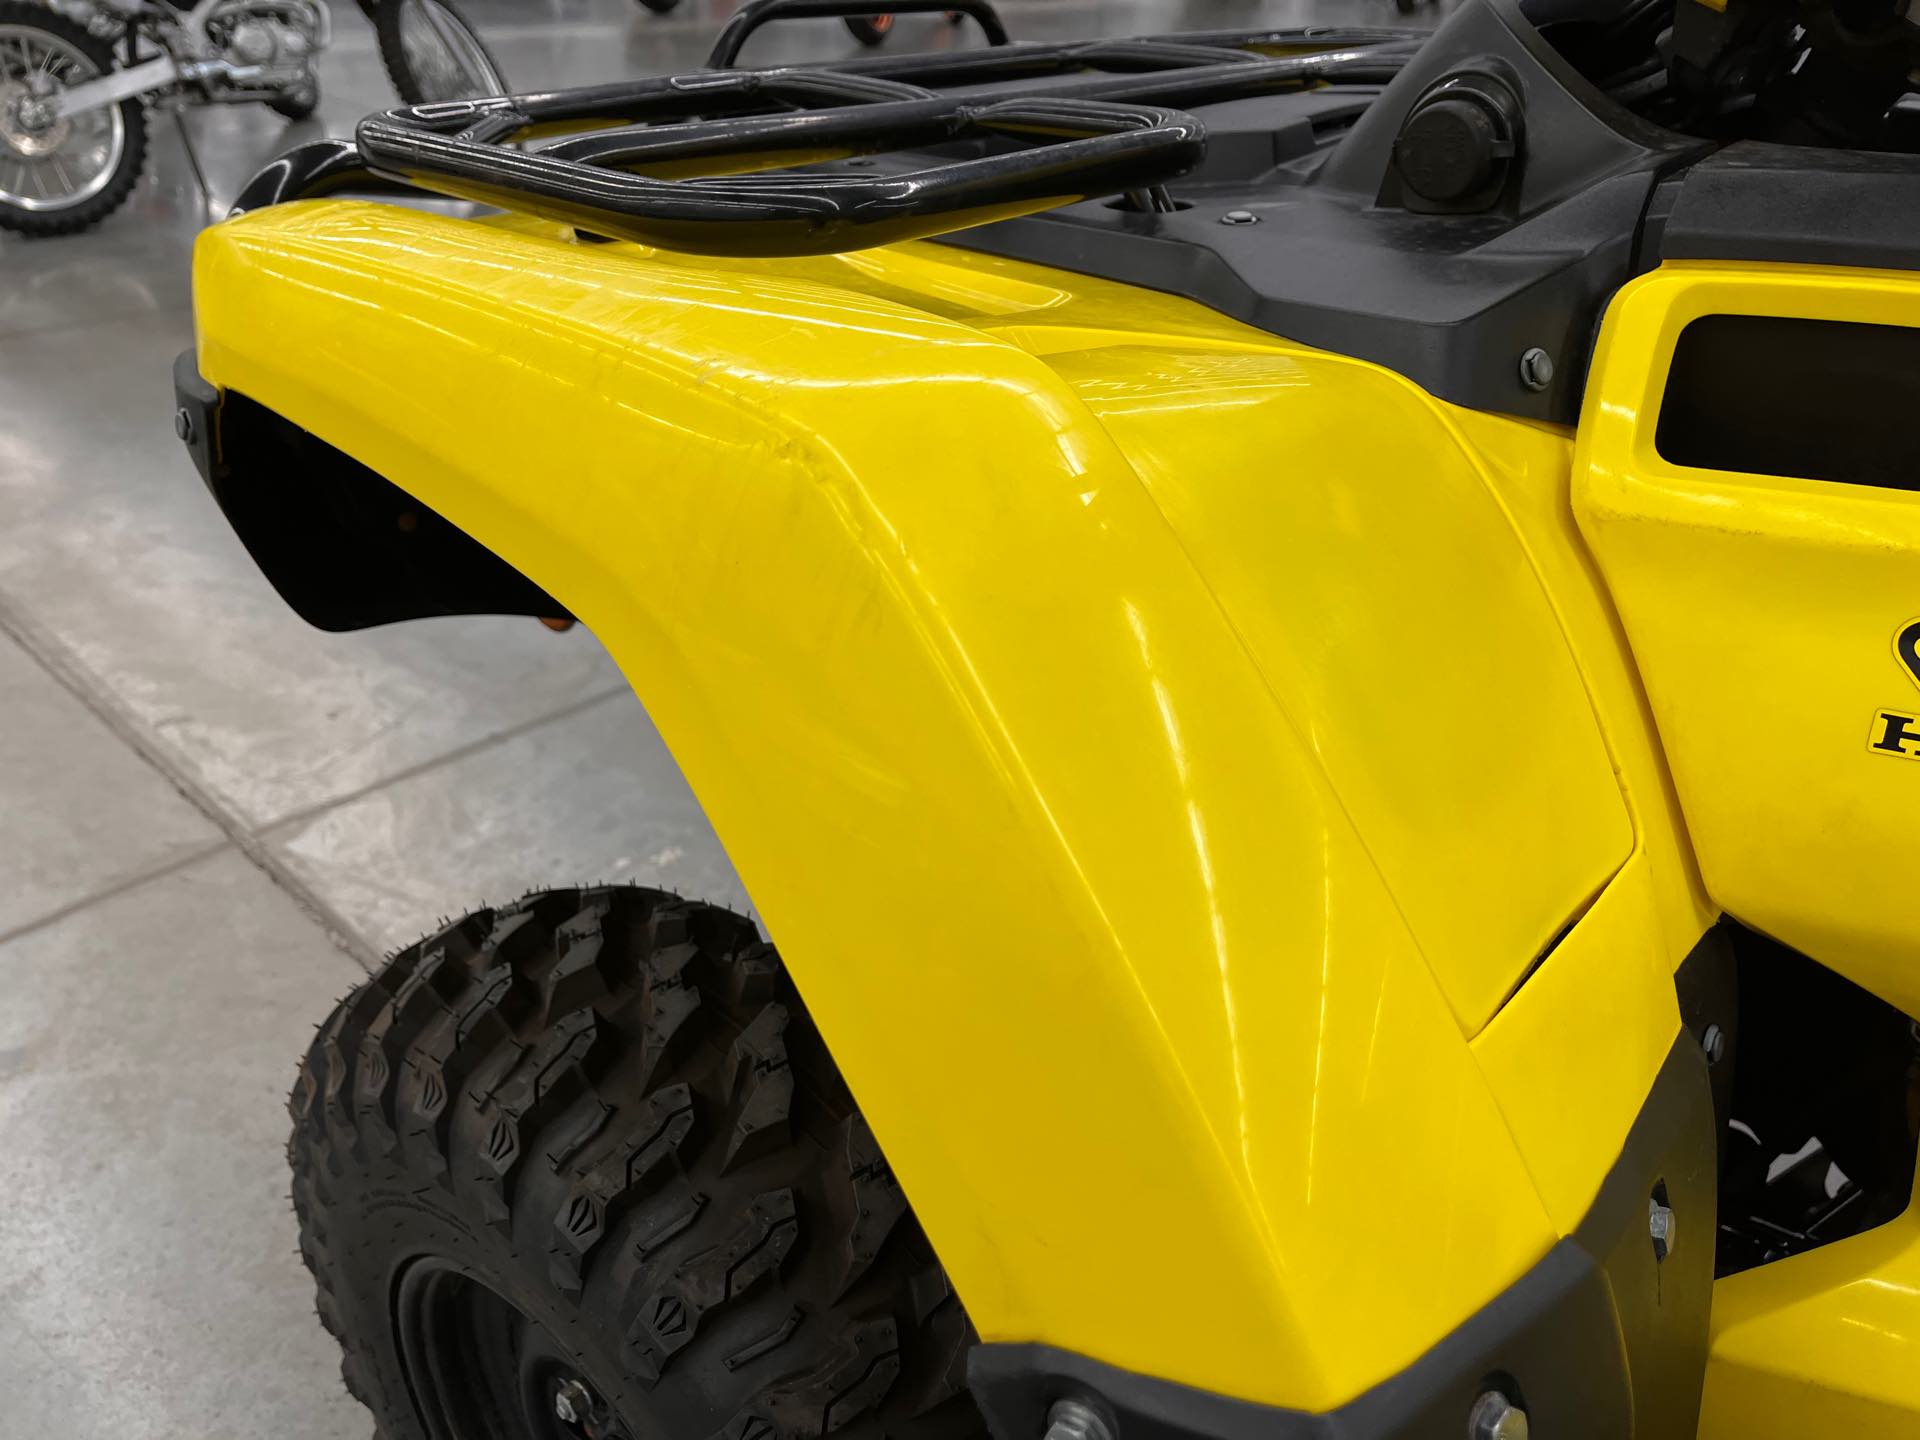 2019 Honda FourTrax Foreman 4x4 at Aces Motorcycles - Denver